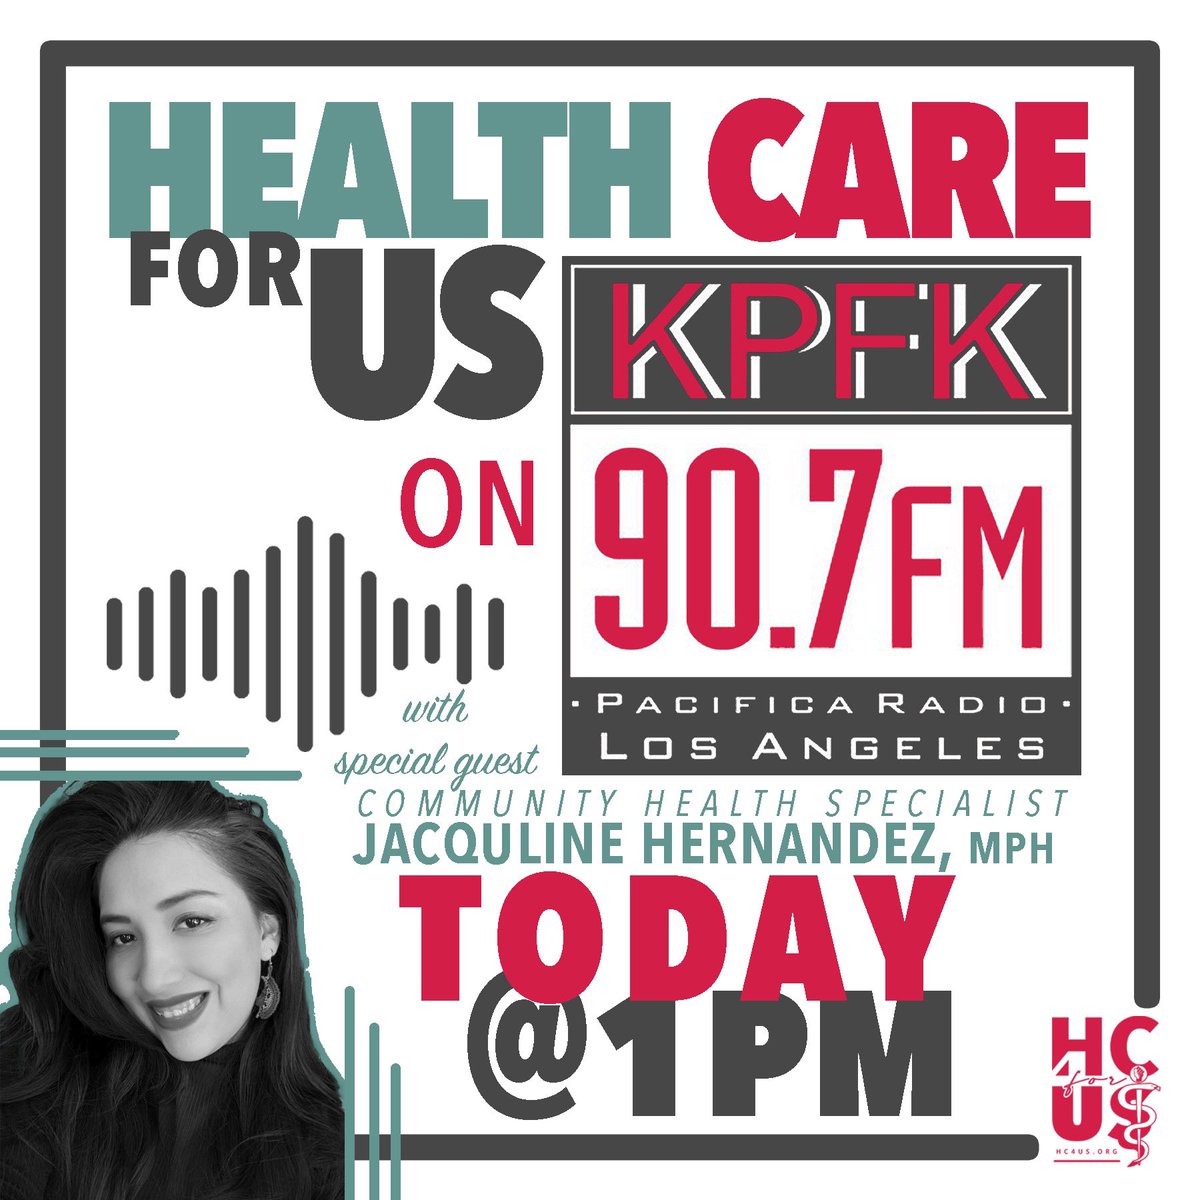 Prioritize care in budgets for safer societies! 🌐 Take the survey at peoplesbudgetla.com, then call in to @KPFK’s Health Care for US program today at 1pm to share your views on spending priorities 📞818-985-5735 #PeoplesBudget #CalCare